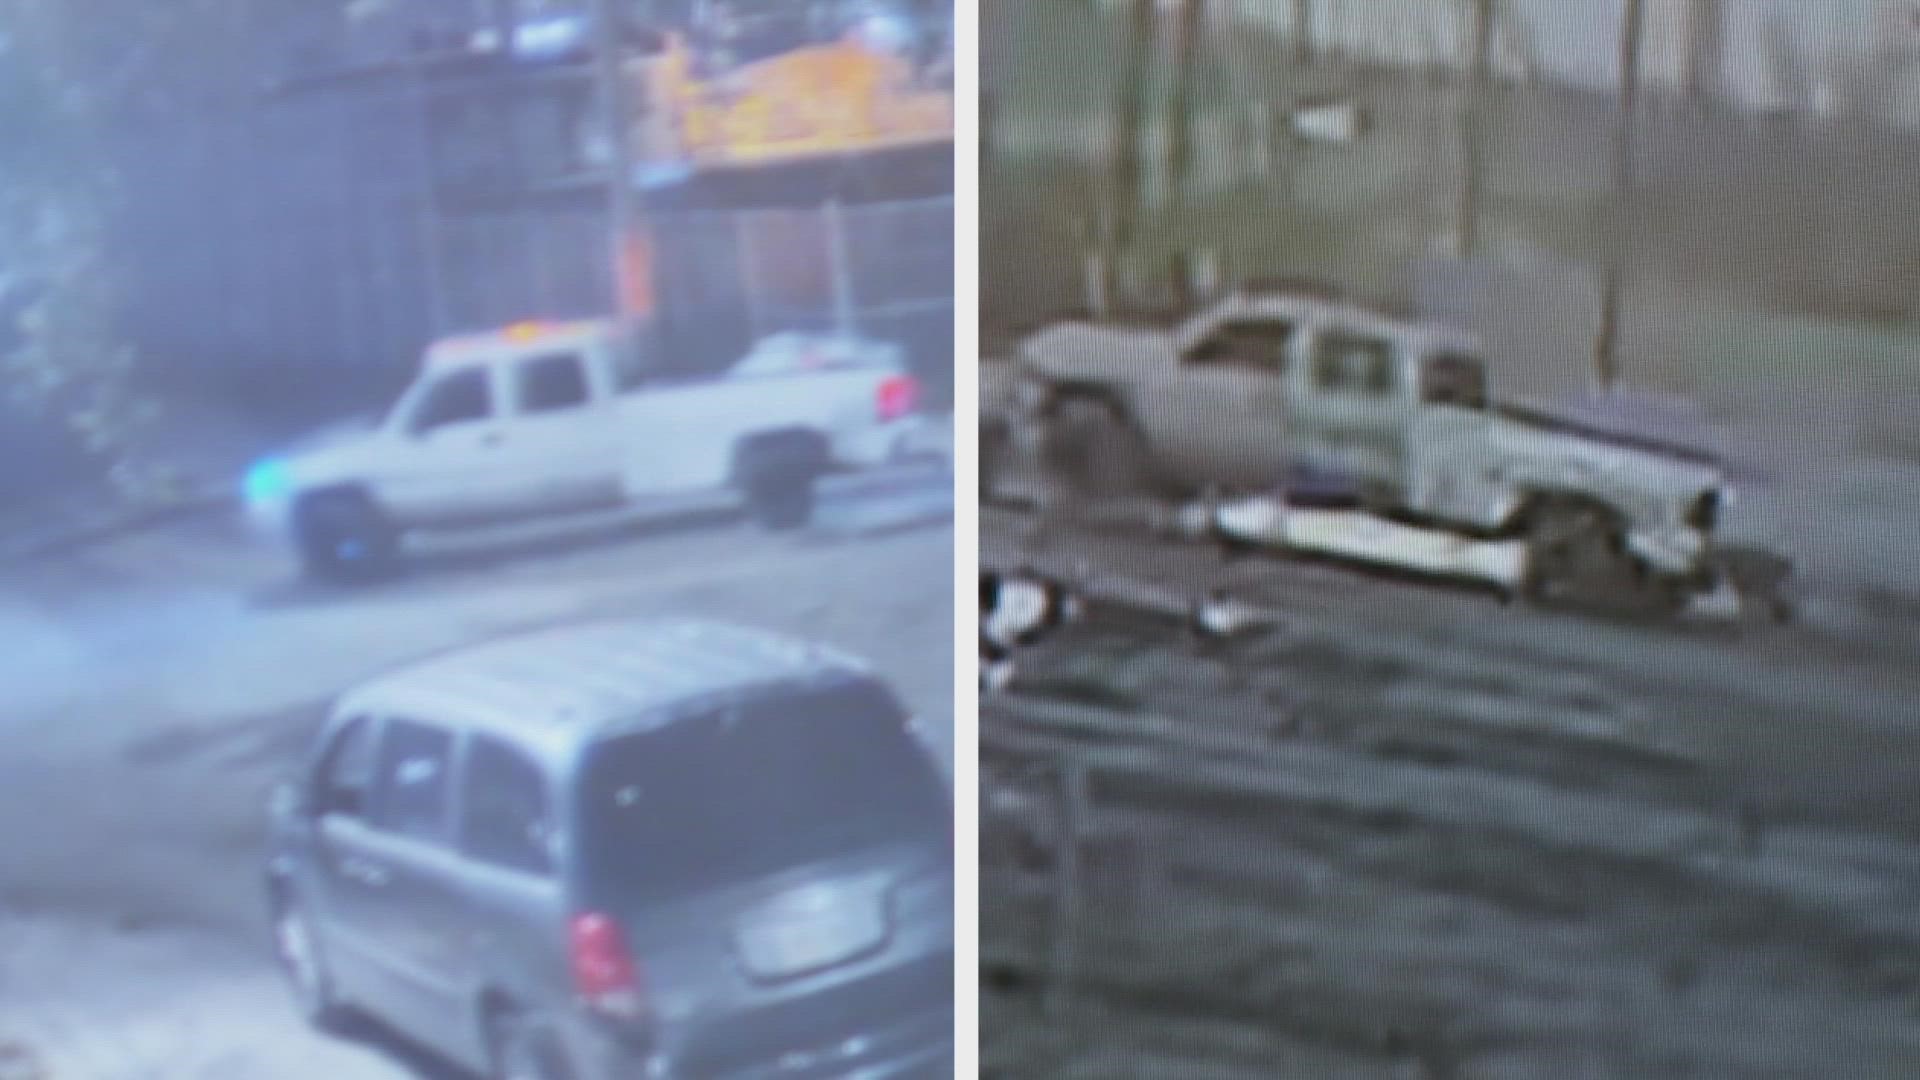 The truck used in this theft - appears to be similar to the one used in a theft at Habitat for Humanity last weekend.